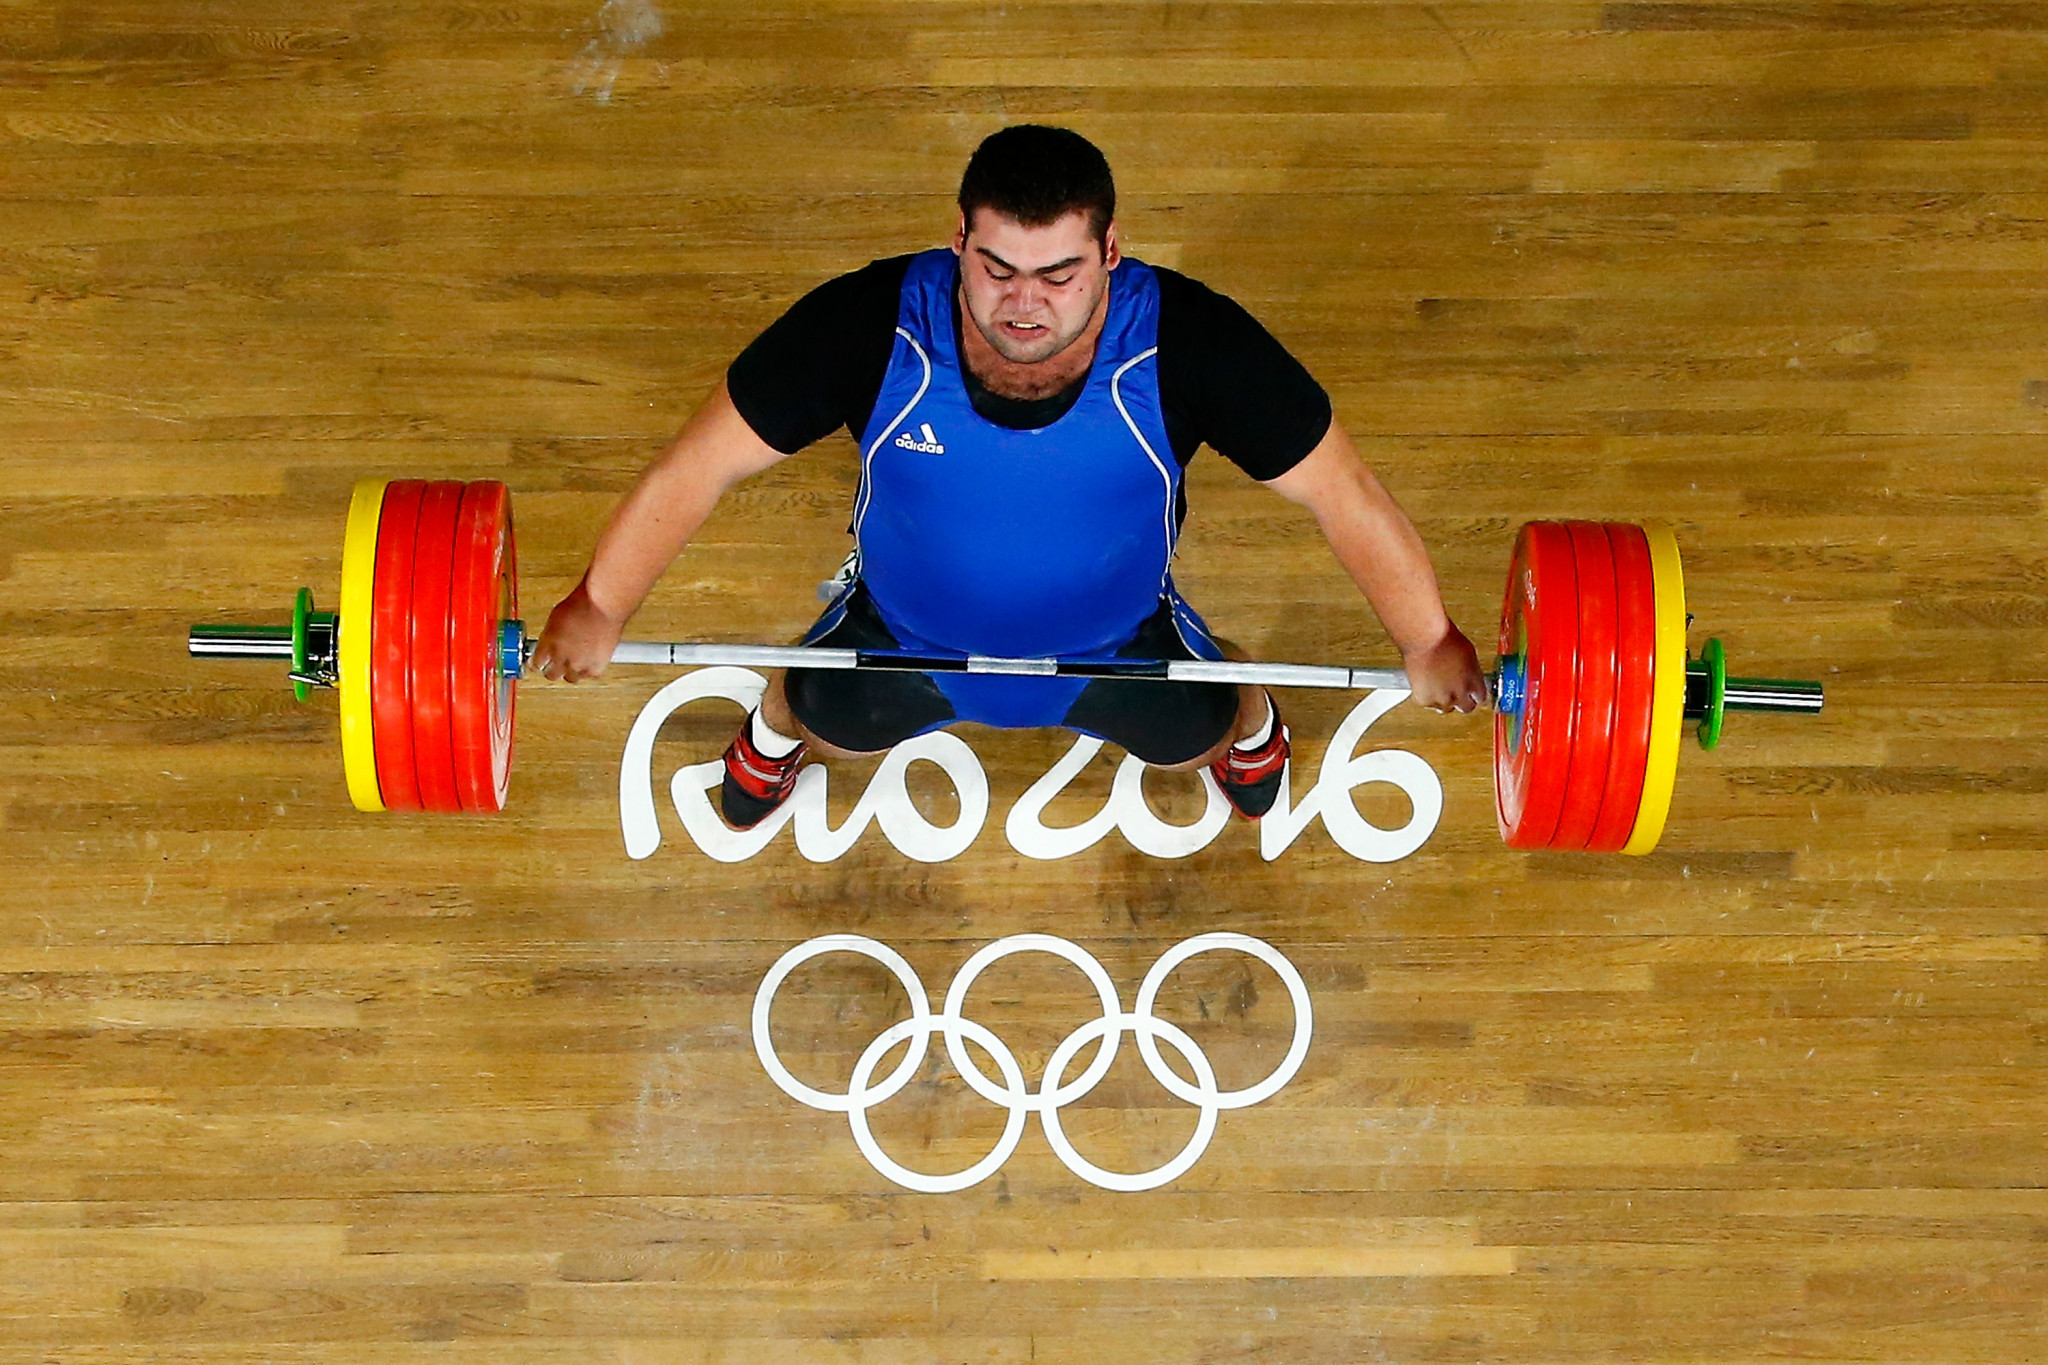 Weightlifting's position on the Olympic programme has been saved for now - but there are fears it could come under threat again if the current scandal is not dealt with quickly and properly ©Getty Images